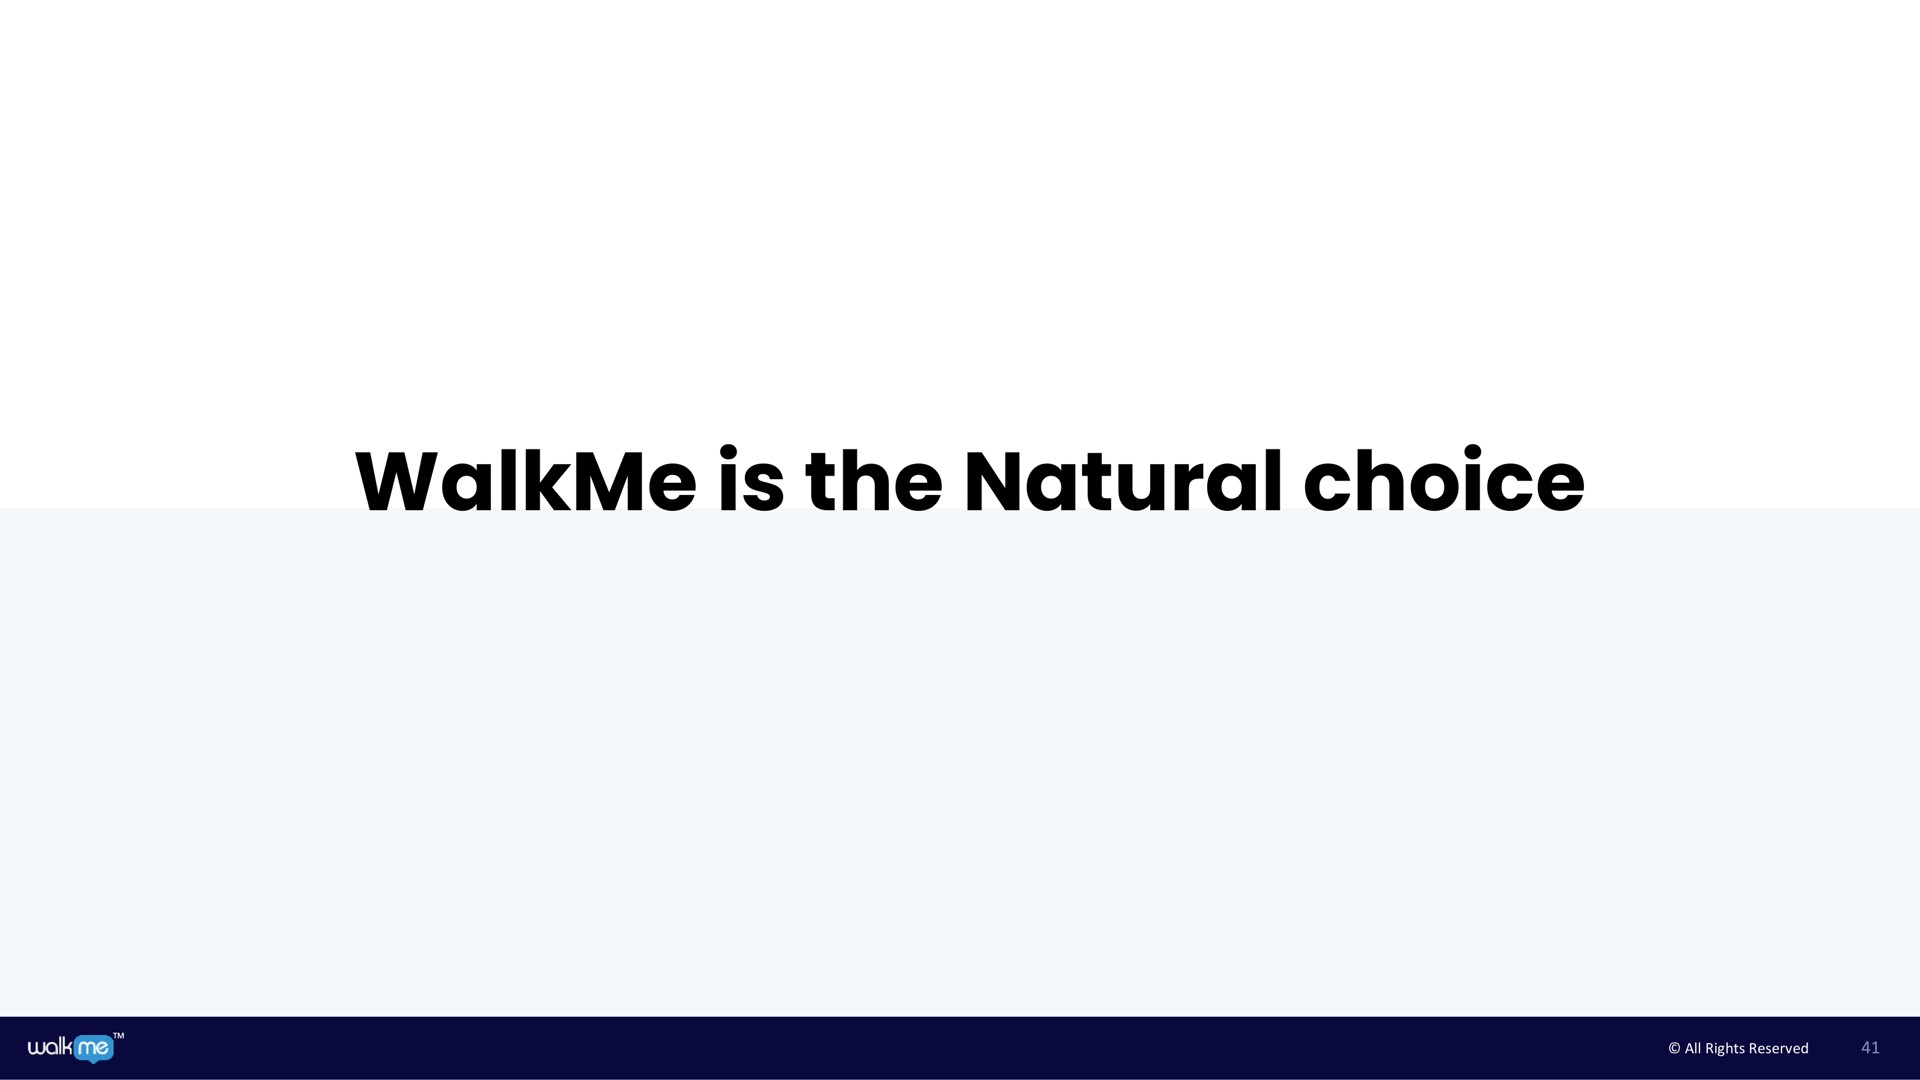 is the natural choice | Walkme